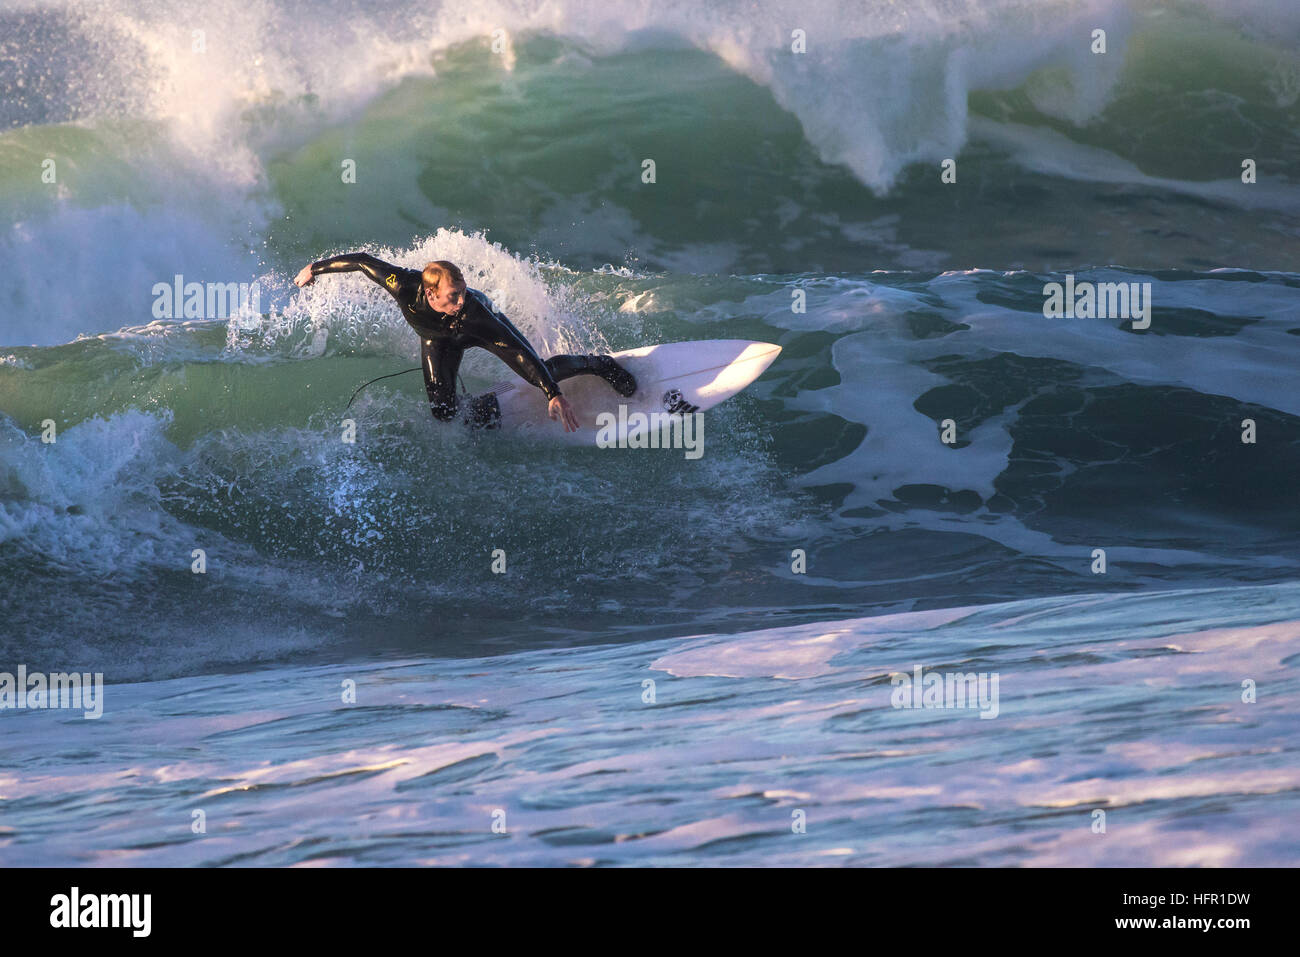 A surfer in spectacular action at Fistral in Newquay, Cornwall, England. UK. Stock Photo